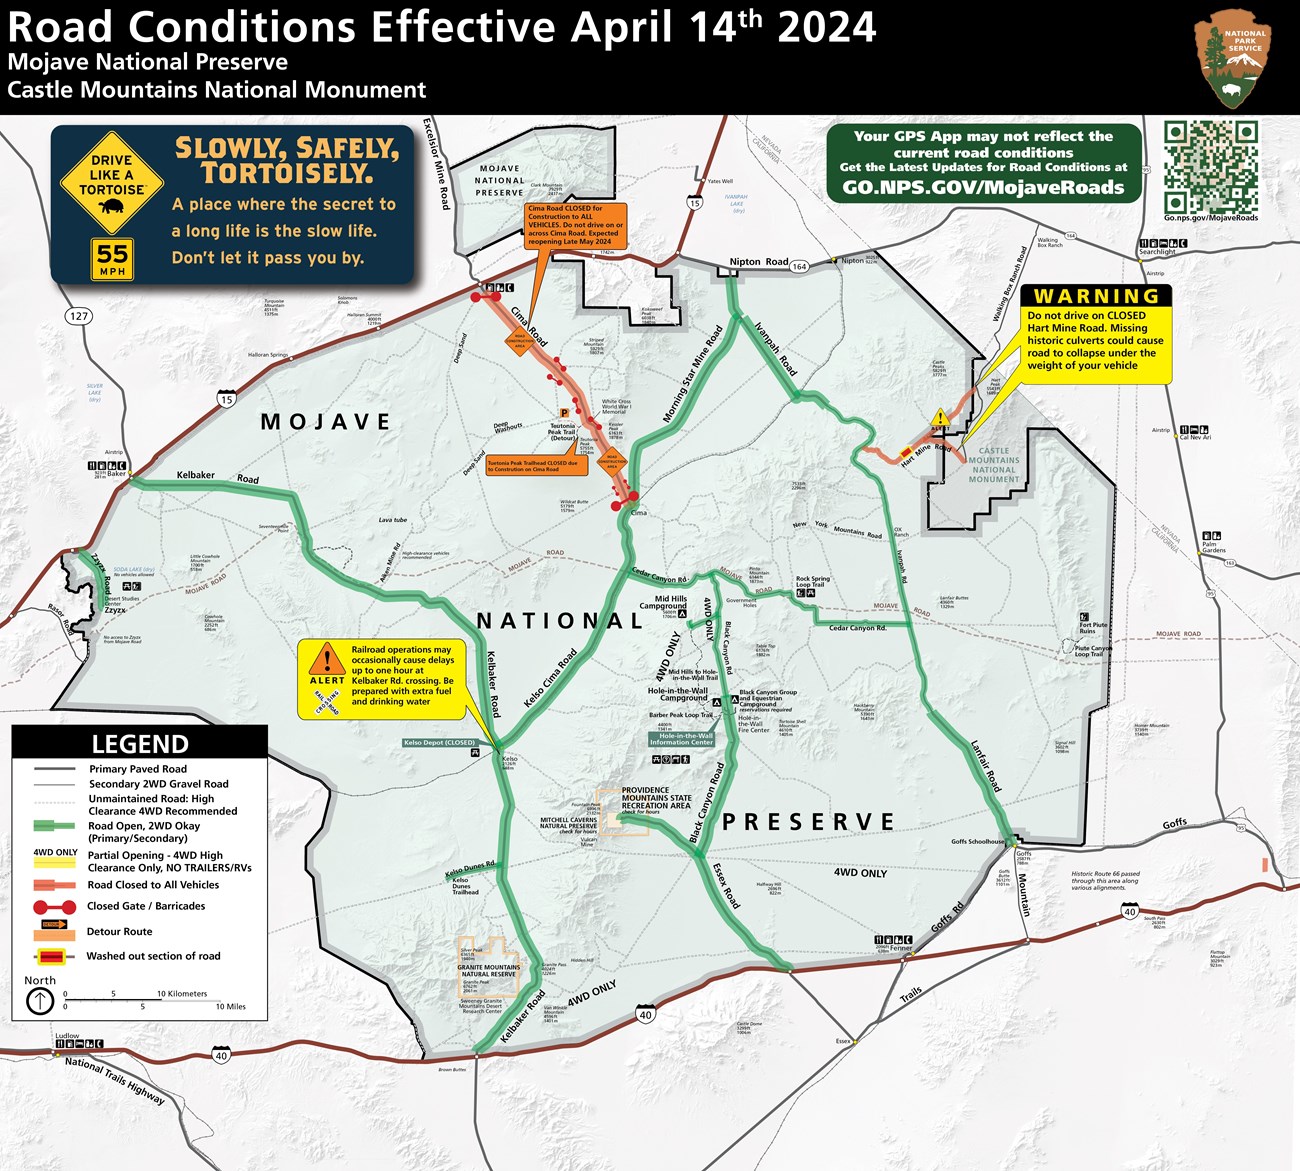 Road conditions map with Cima Road highlighted in Red for Closure, Map current as of April 14 2024 Map warns of dangerous conditions and closure of Hart Mine Road in east of Preserve. Warning box indicates 1 hour delays on railroad crossing by Kelso Depot